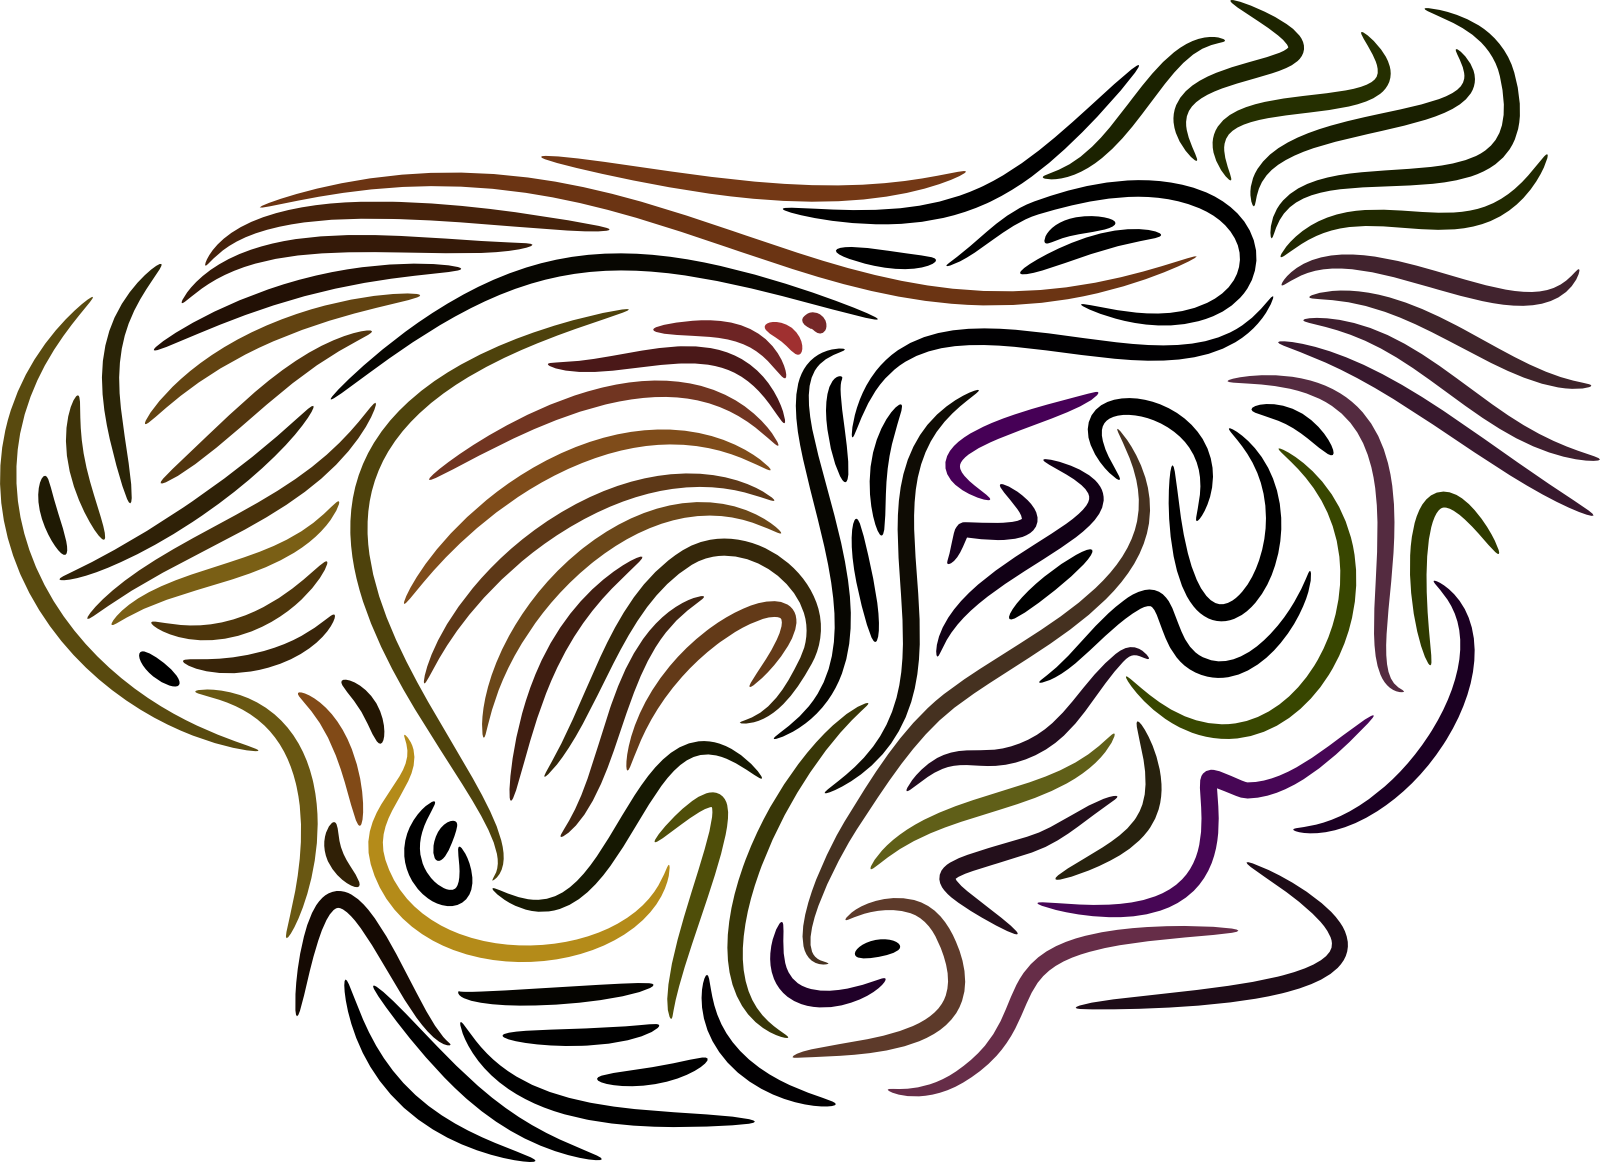 Abstract swirling lines